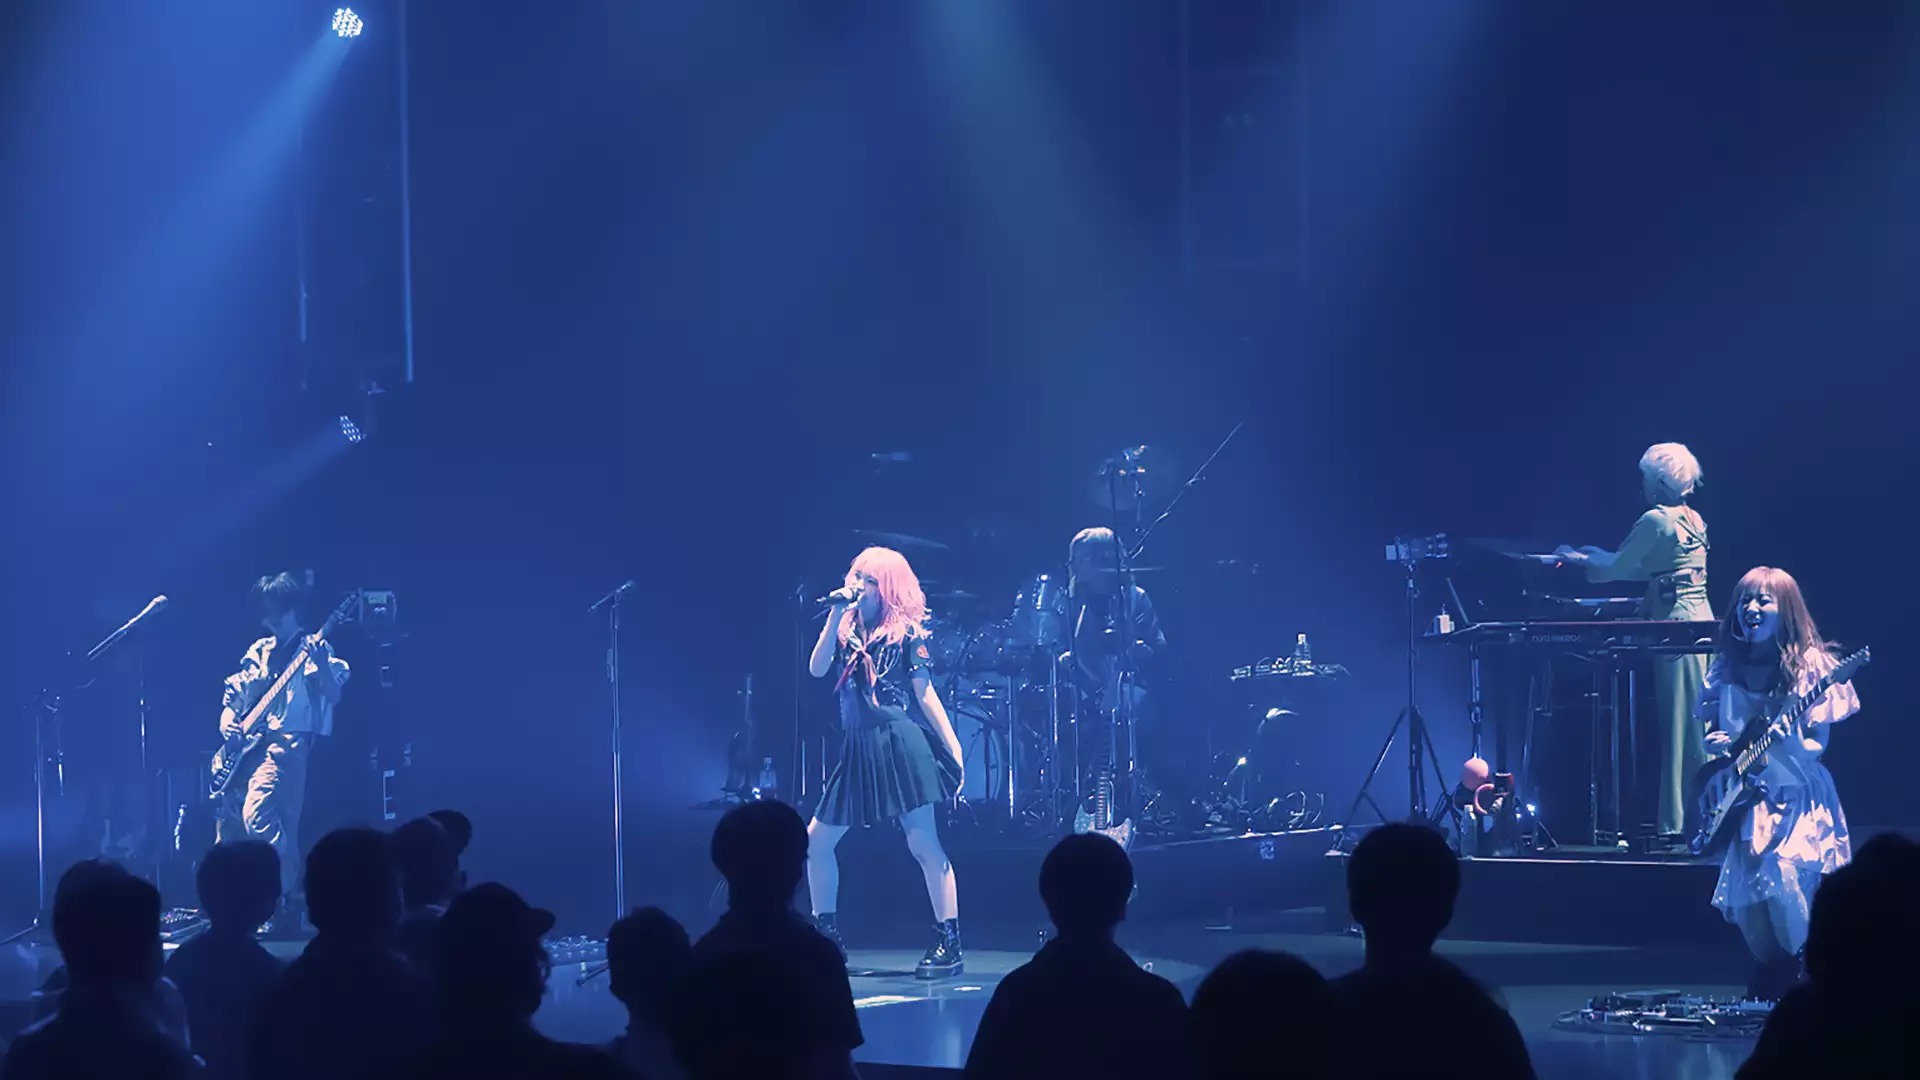 MindSet (Live at EX THEATER ROPPONGI on June 20th, 2021)